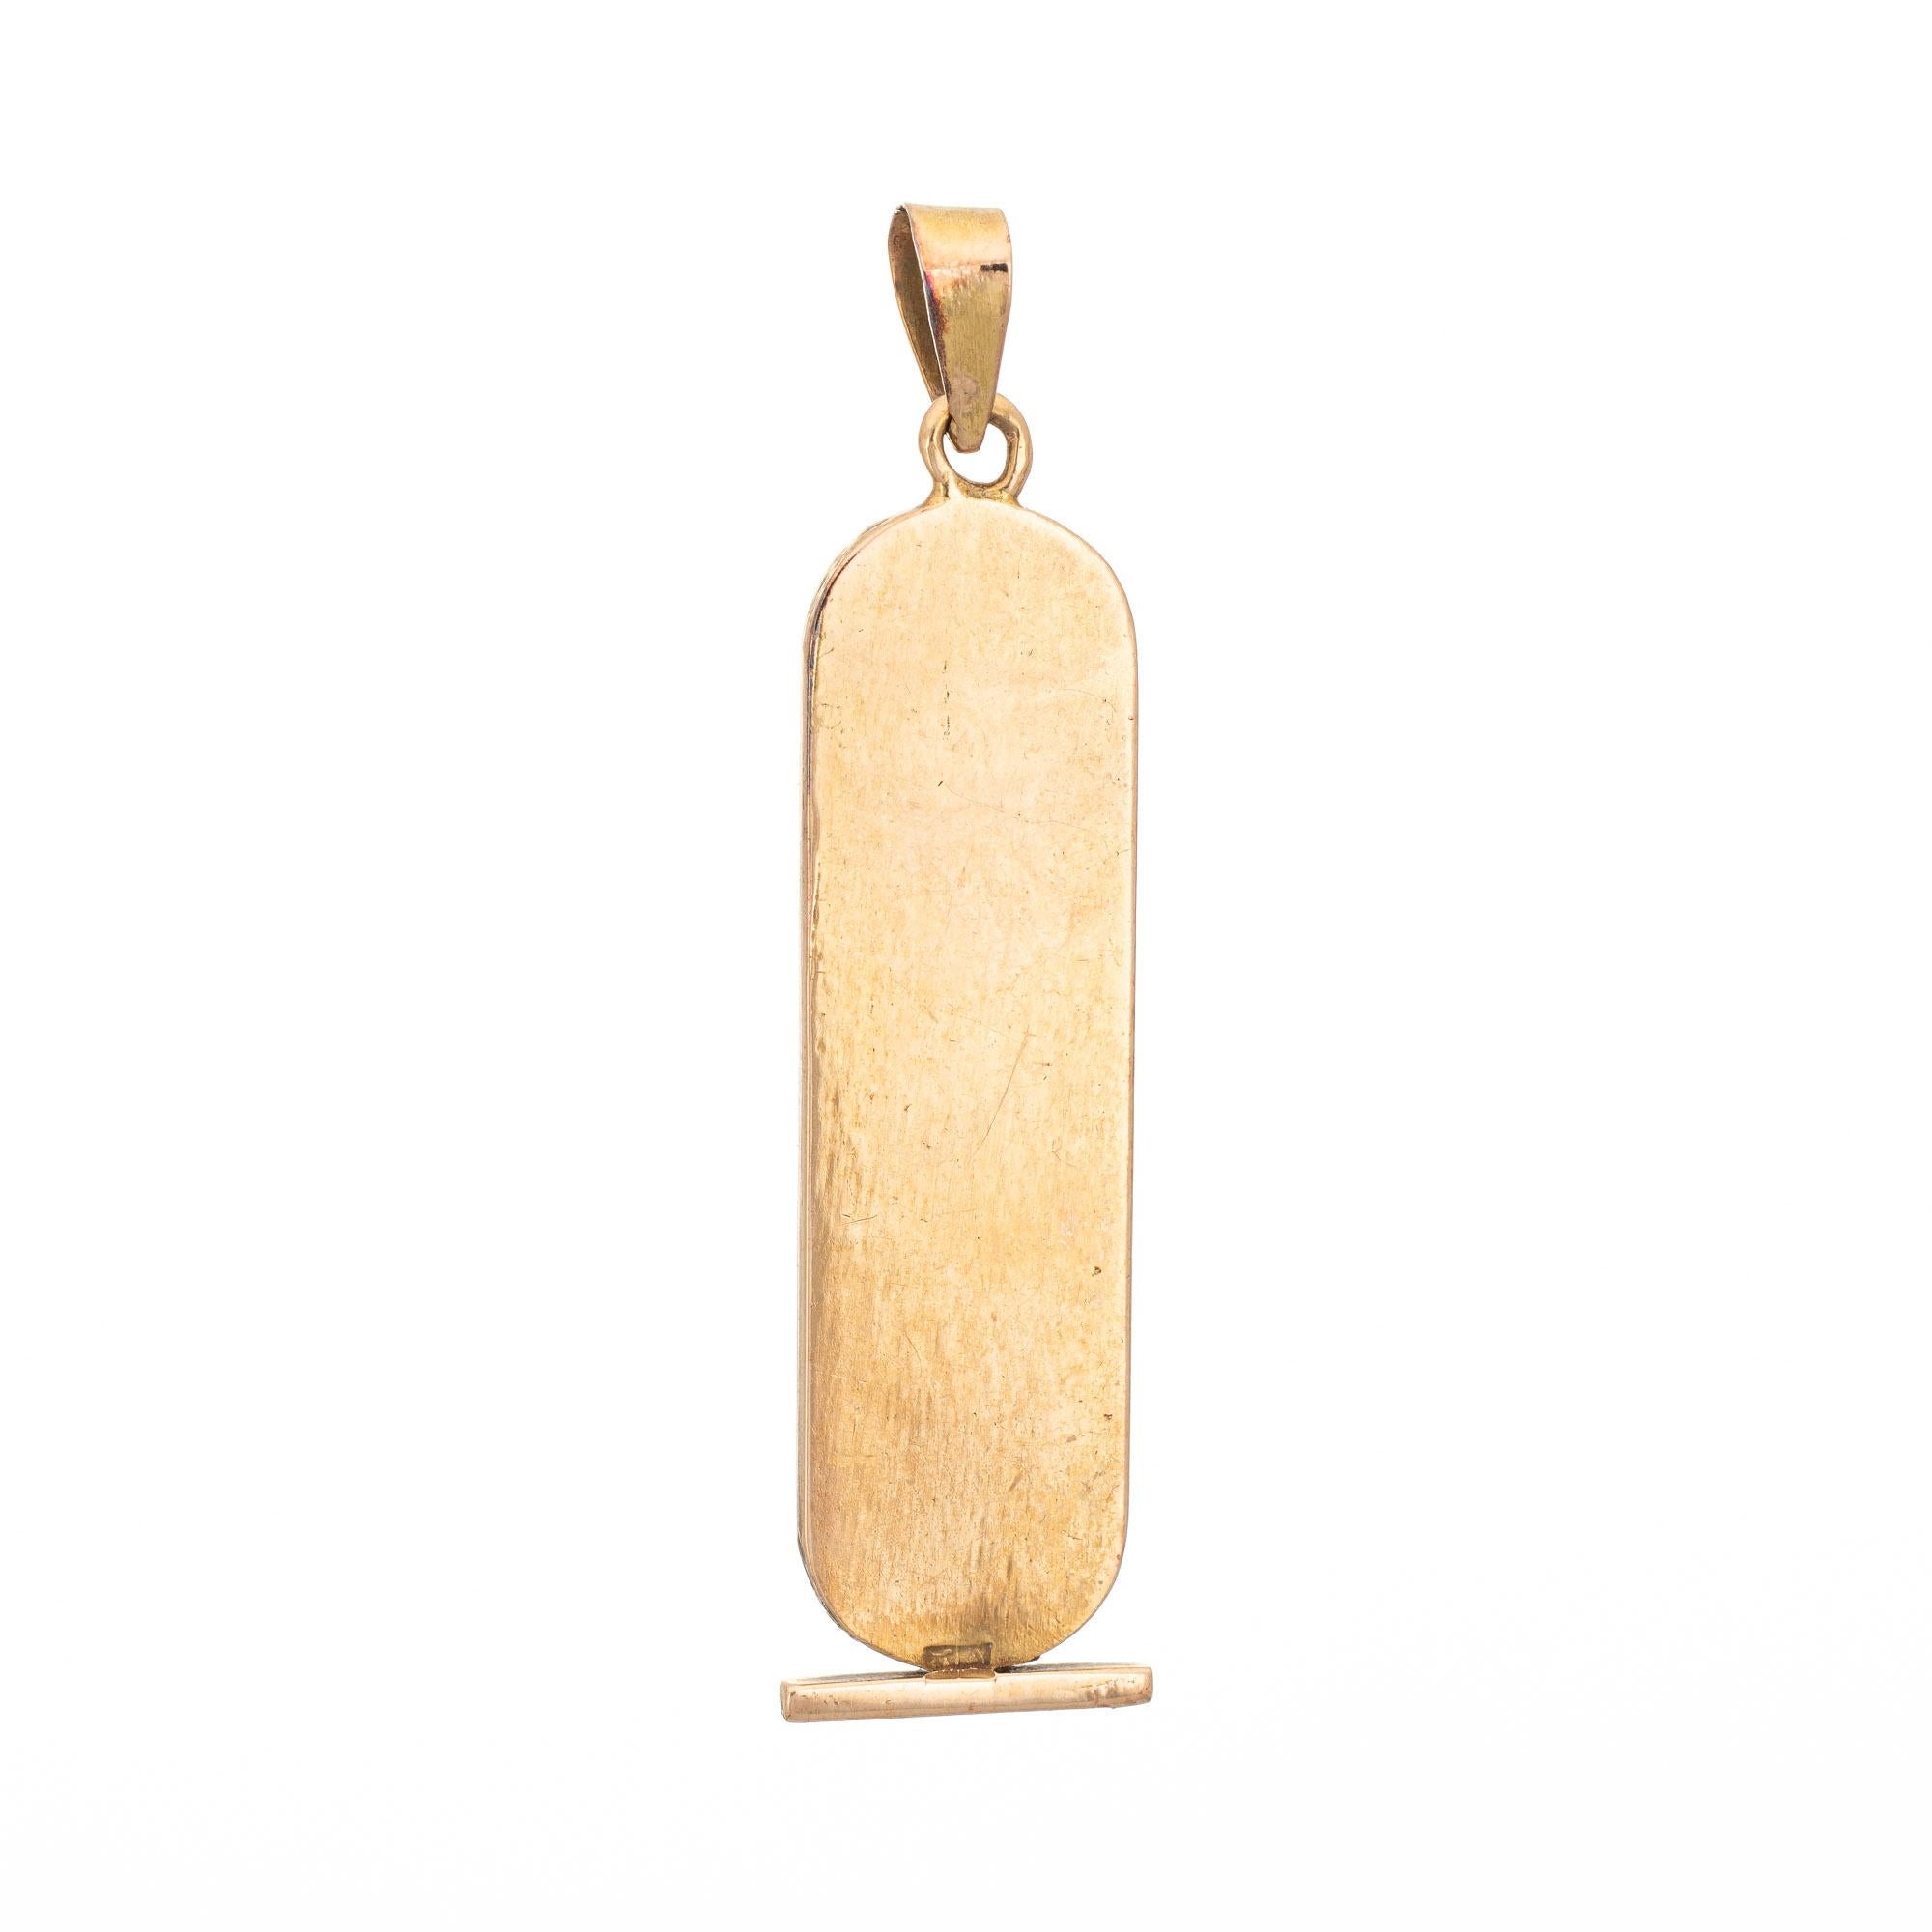 Finely detailed vintage Egyptian Cartouche Hieroglyphics pendant crafted in 18 karat yellow gold (circa 1970s to 1980s). 

The stylish pendant features three Hieroglyphics - Reed, Snake & Eagle that roughly represents the initials 